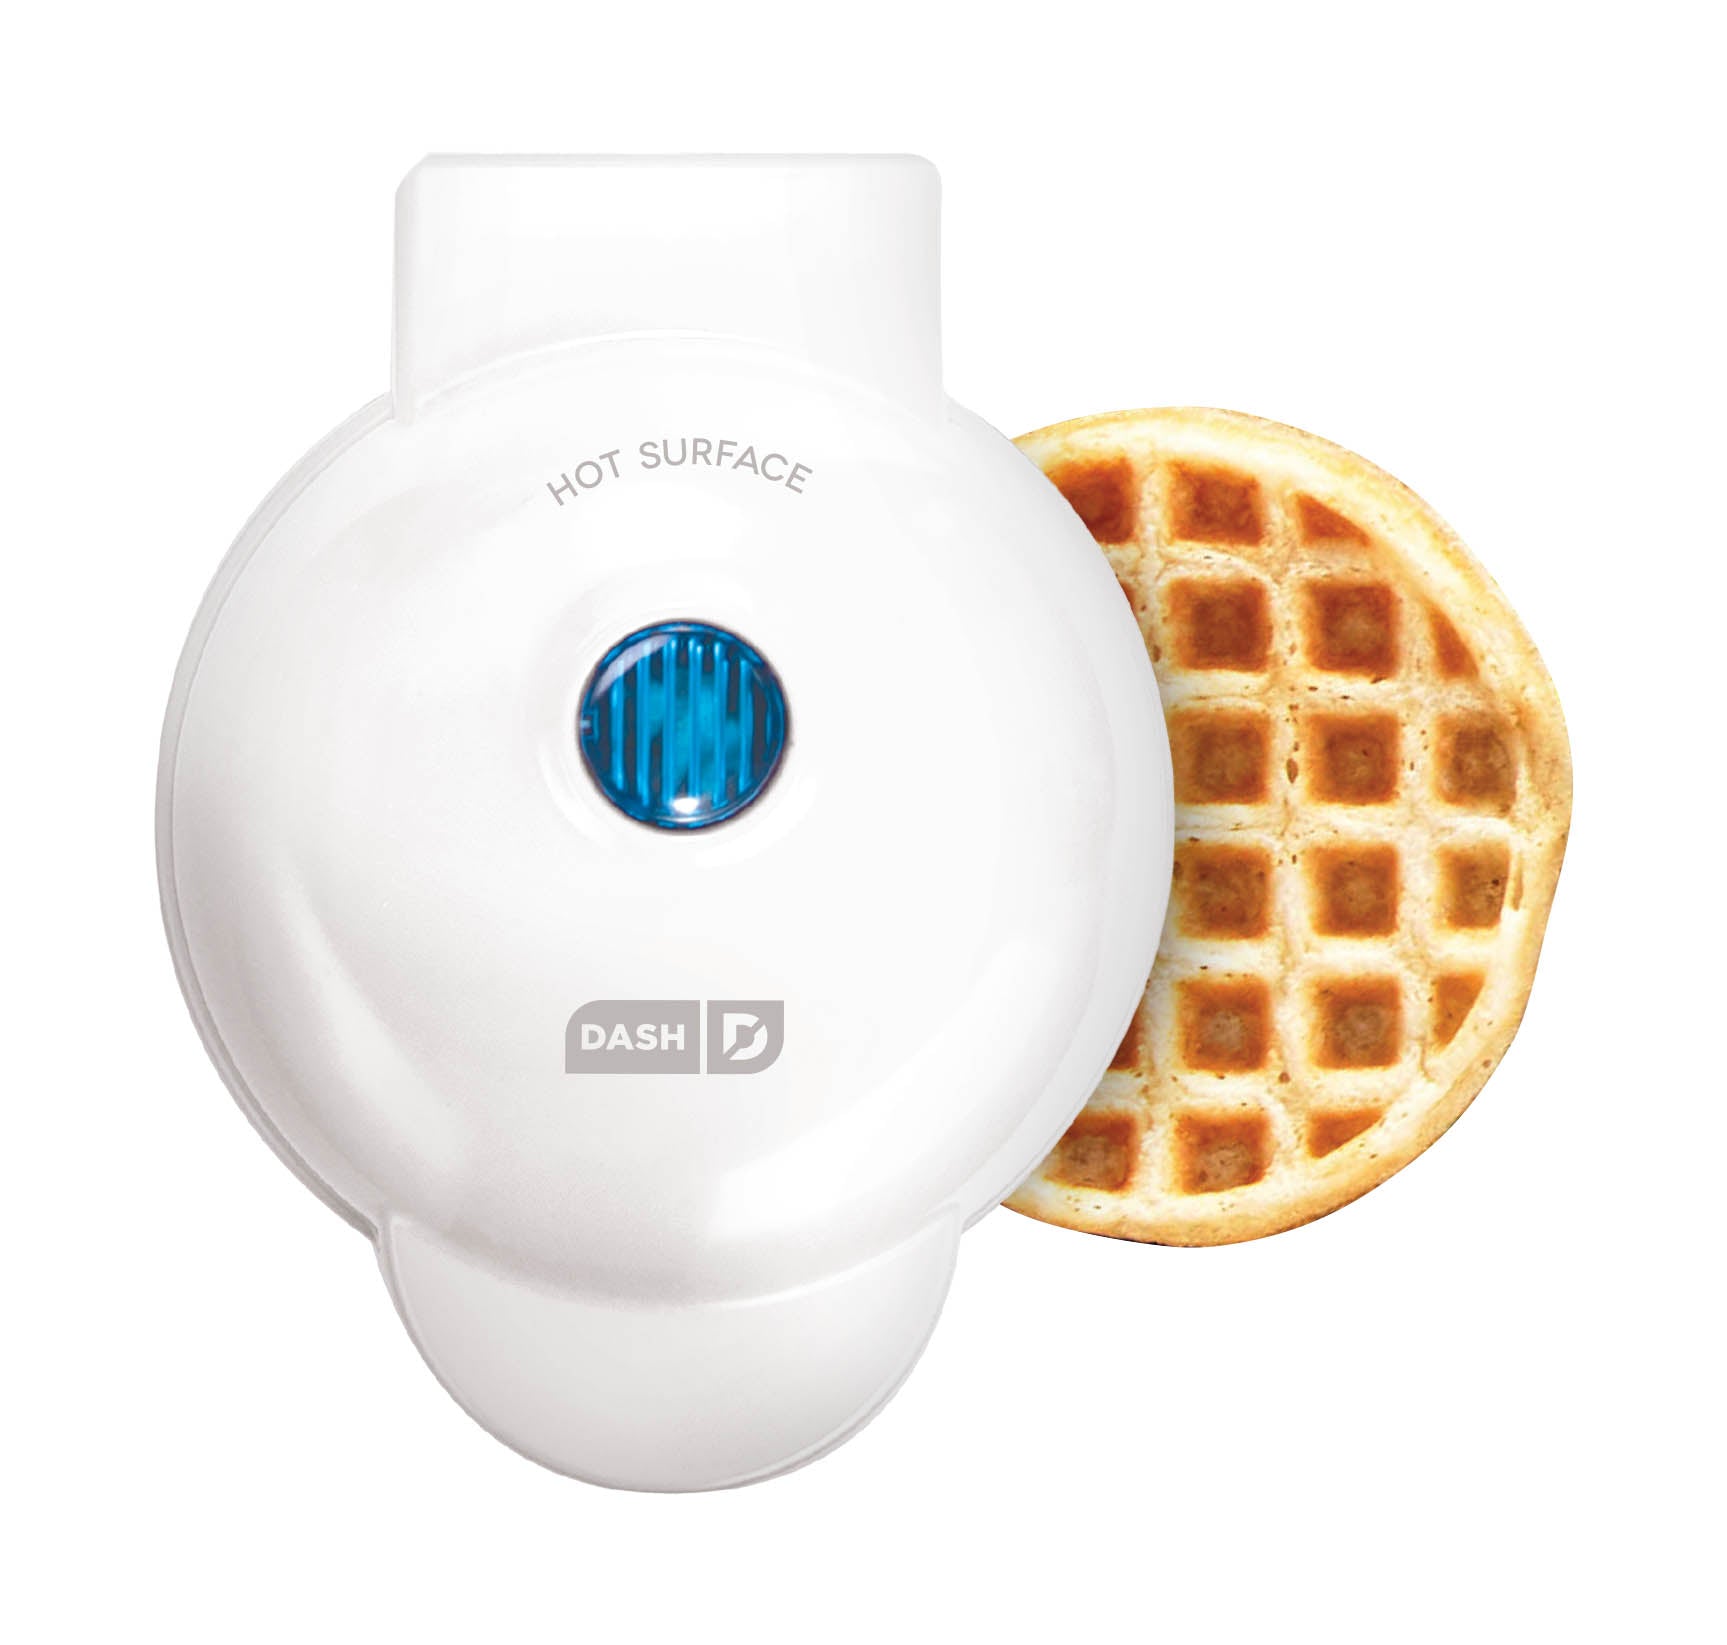 Waffle Wow! Car Mini Waffle Maker - Make 7 Different Race Cars, Trucks, and  Automobile Shaped Waffles - Electric Non-Stick 